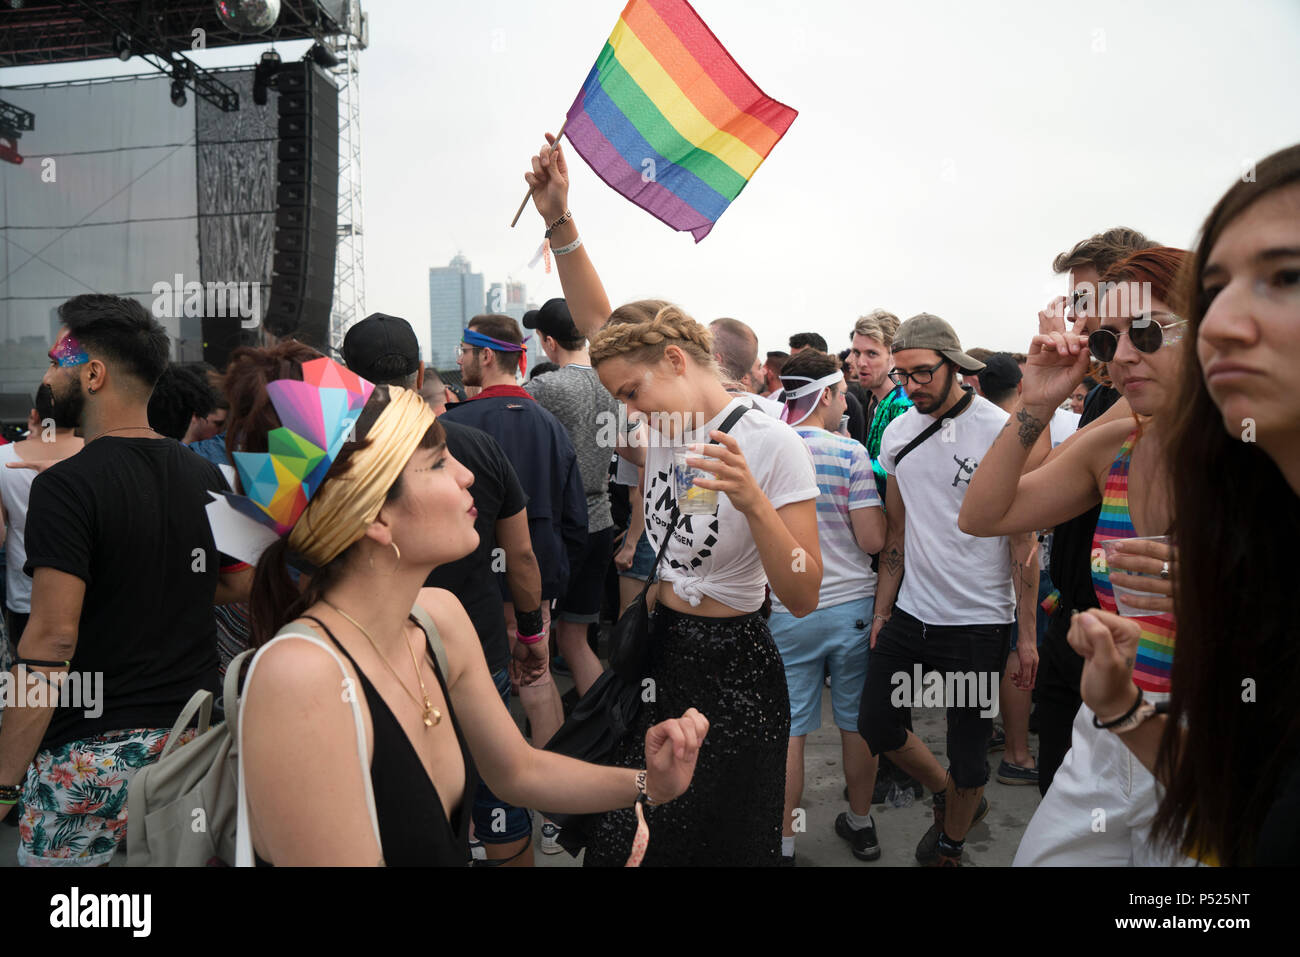 New York, USA. 23rd June, 2018. Concluding Gay Pride Week in New York City, Pride Island on Pier 97 in midtown Manhattan is showcasing a variety of musical talent plus opportunities over a two-day period for the LGBTQ community to dance, drink, eat and socialize. Some of the proceeds will go to support non-profit organizations in the New York City area. (Credit: Terese Loeb Kreuzer/Alamy Live News) Stock Photo